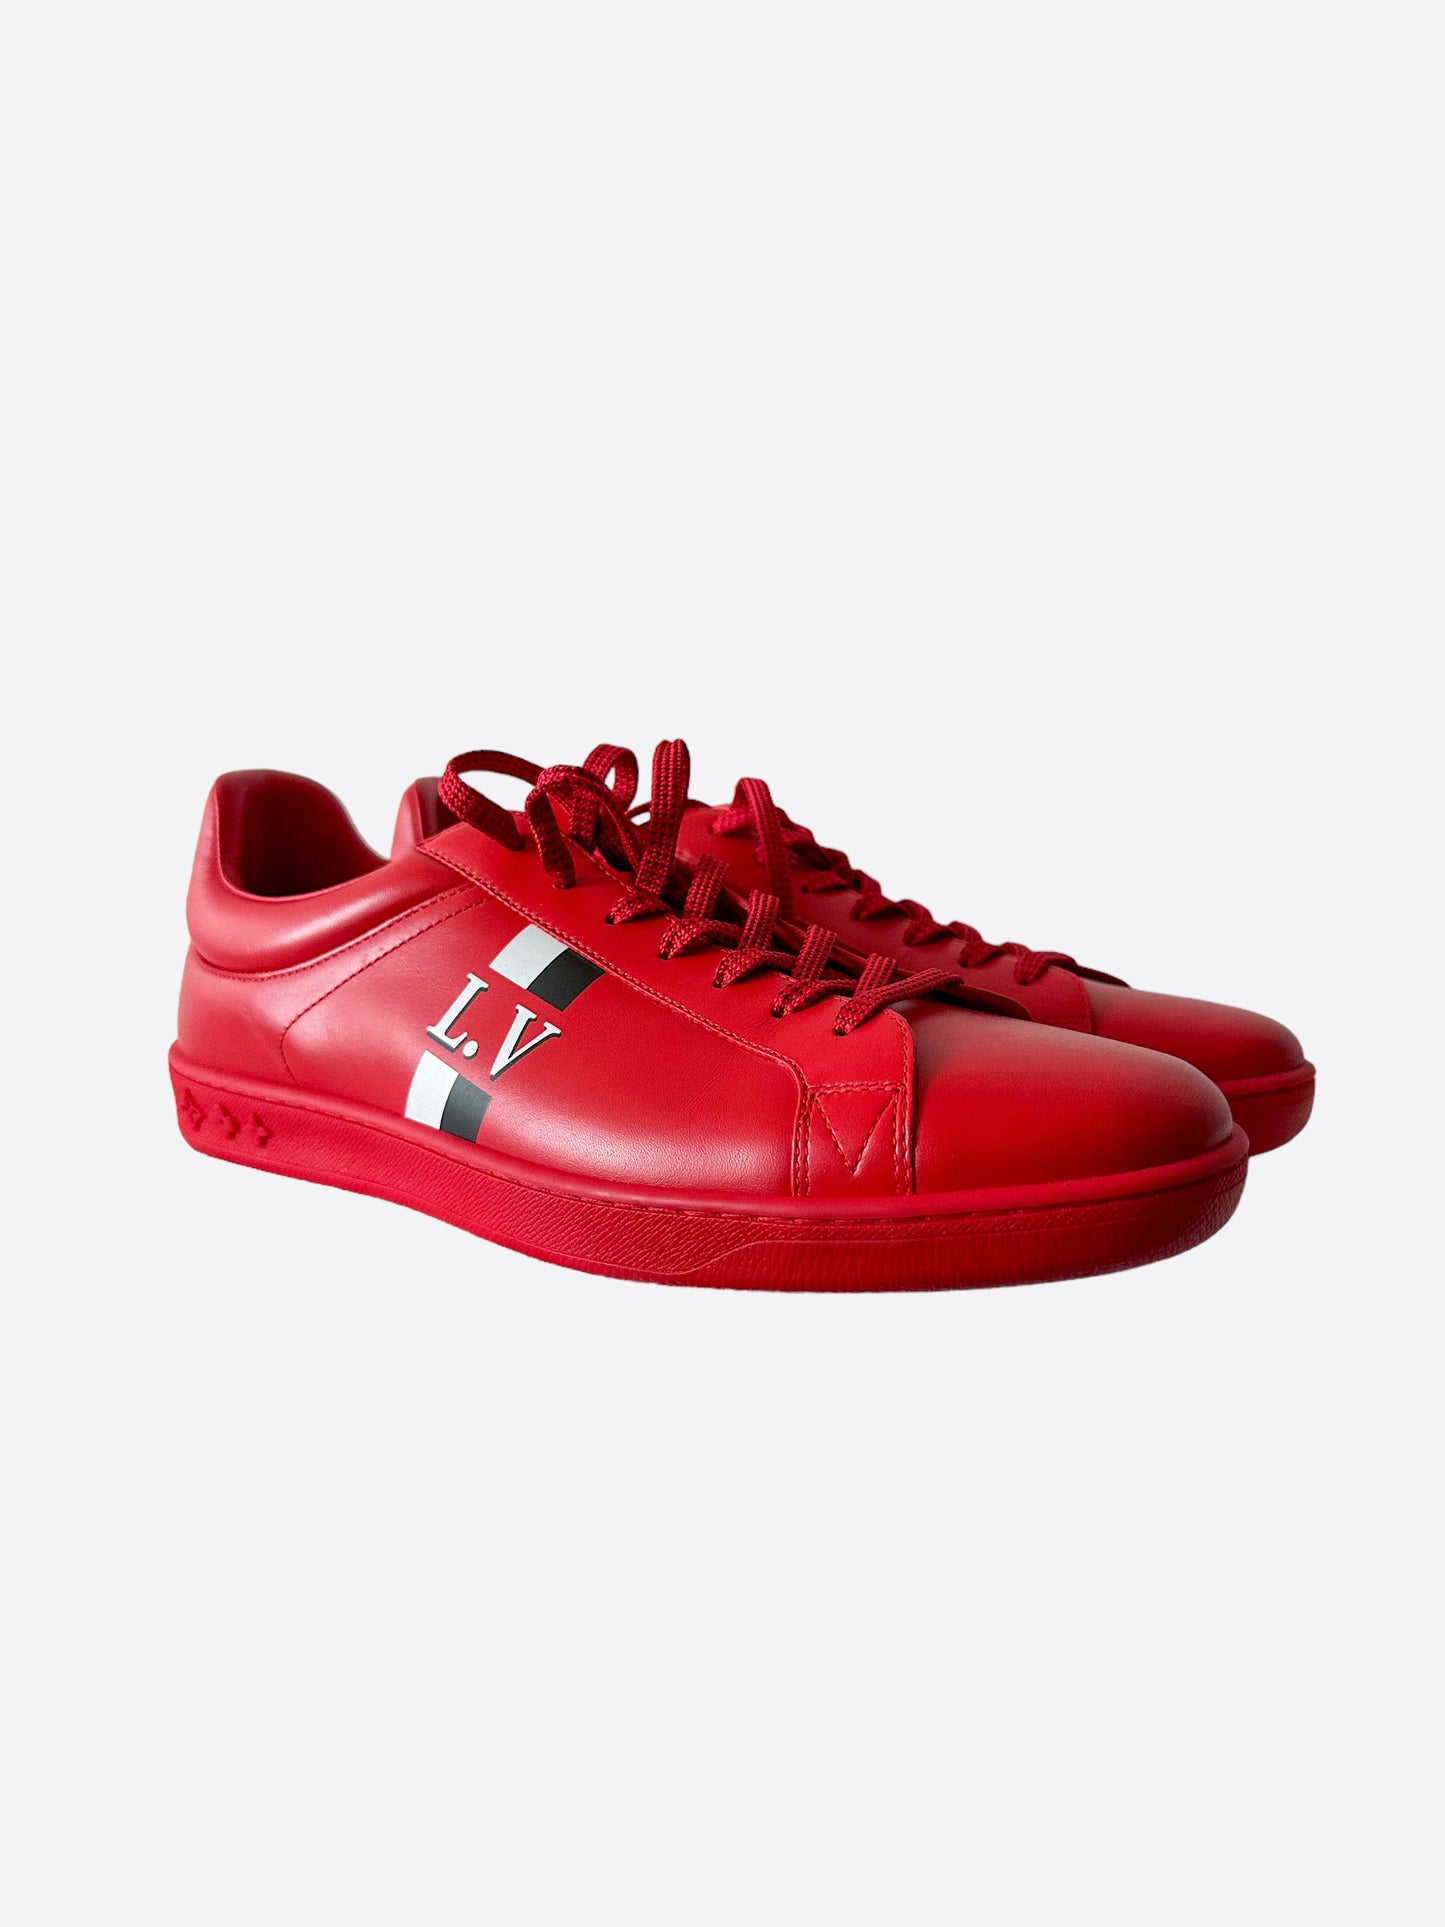 Louis Vuitton, Shoes, Luxembourg Sneaker Size 3